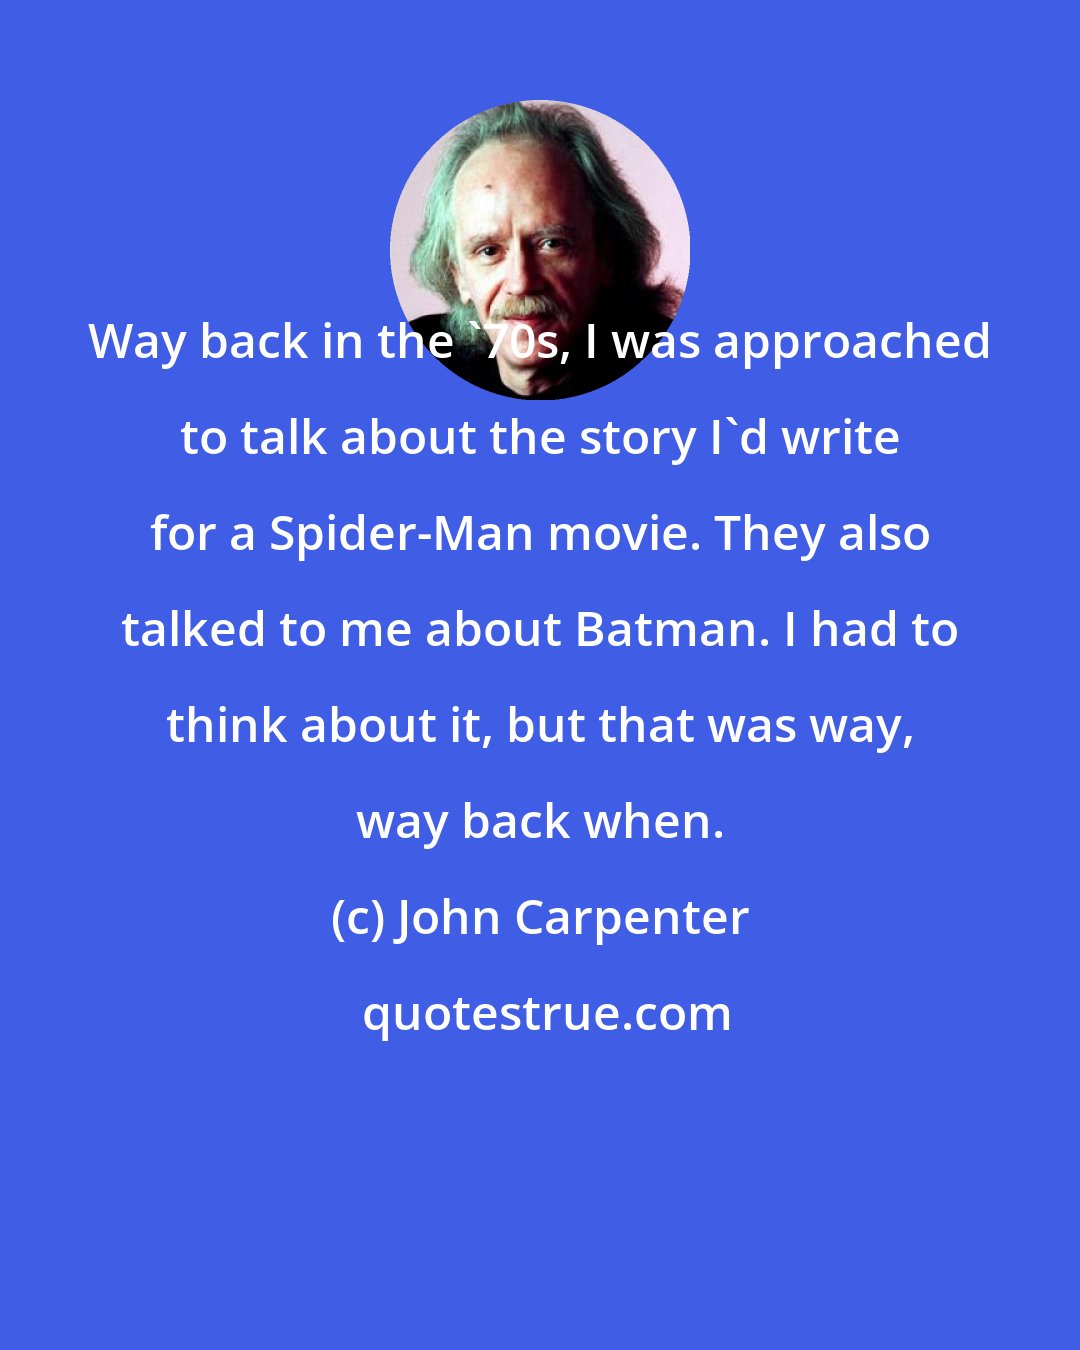 John Carpenter: Way back in the '70s, I was approached to talk about the story I'd write for a Spider-Man movie. They also talked to me about Batman. I had to think about it, but that was way, way back when.